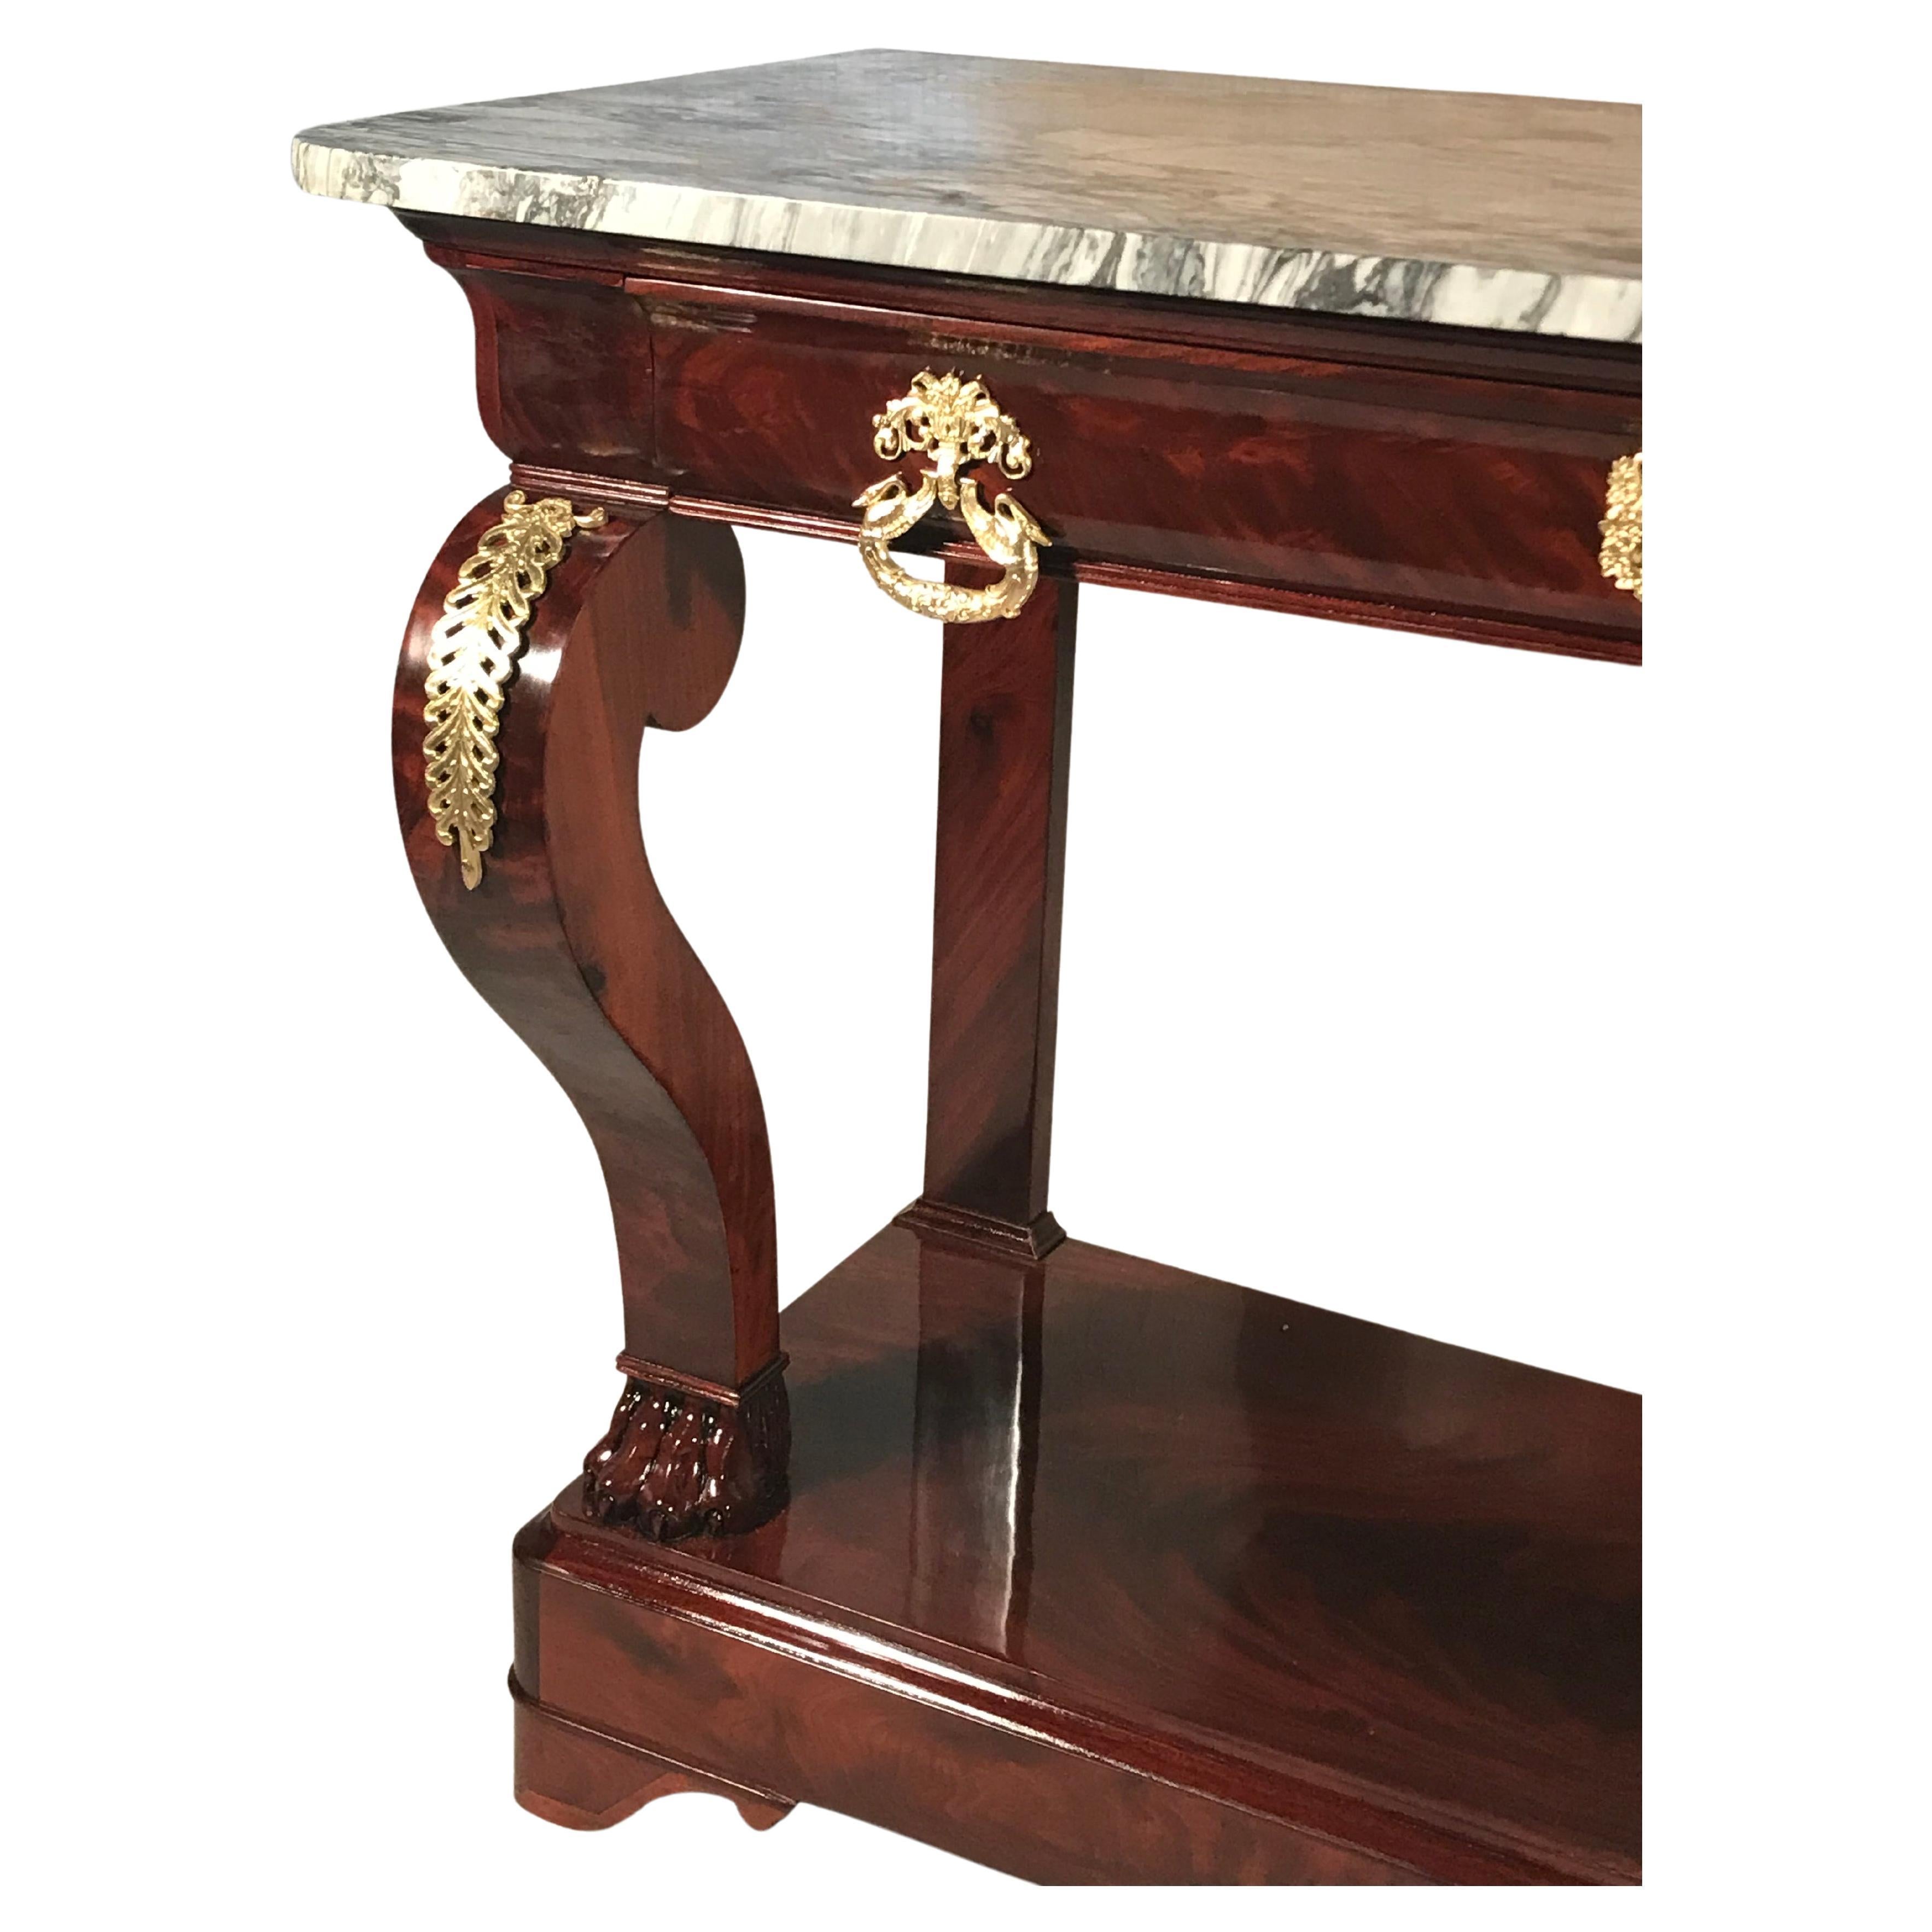 This beautiful French Restoration Console table dates back to around 1830. The console table has a pretty mahogany veneer. The s-shaped front legs which Stand on lion claw feet are decorated with bronze fittings. The console table has one central